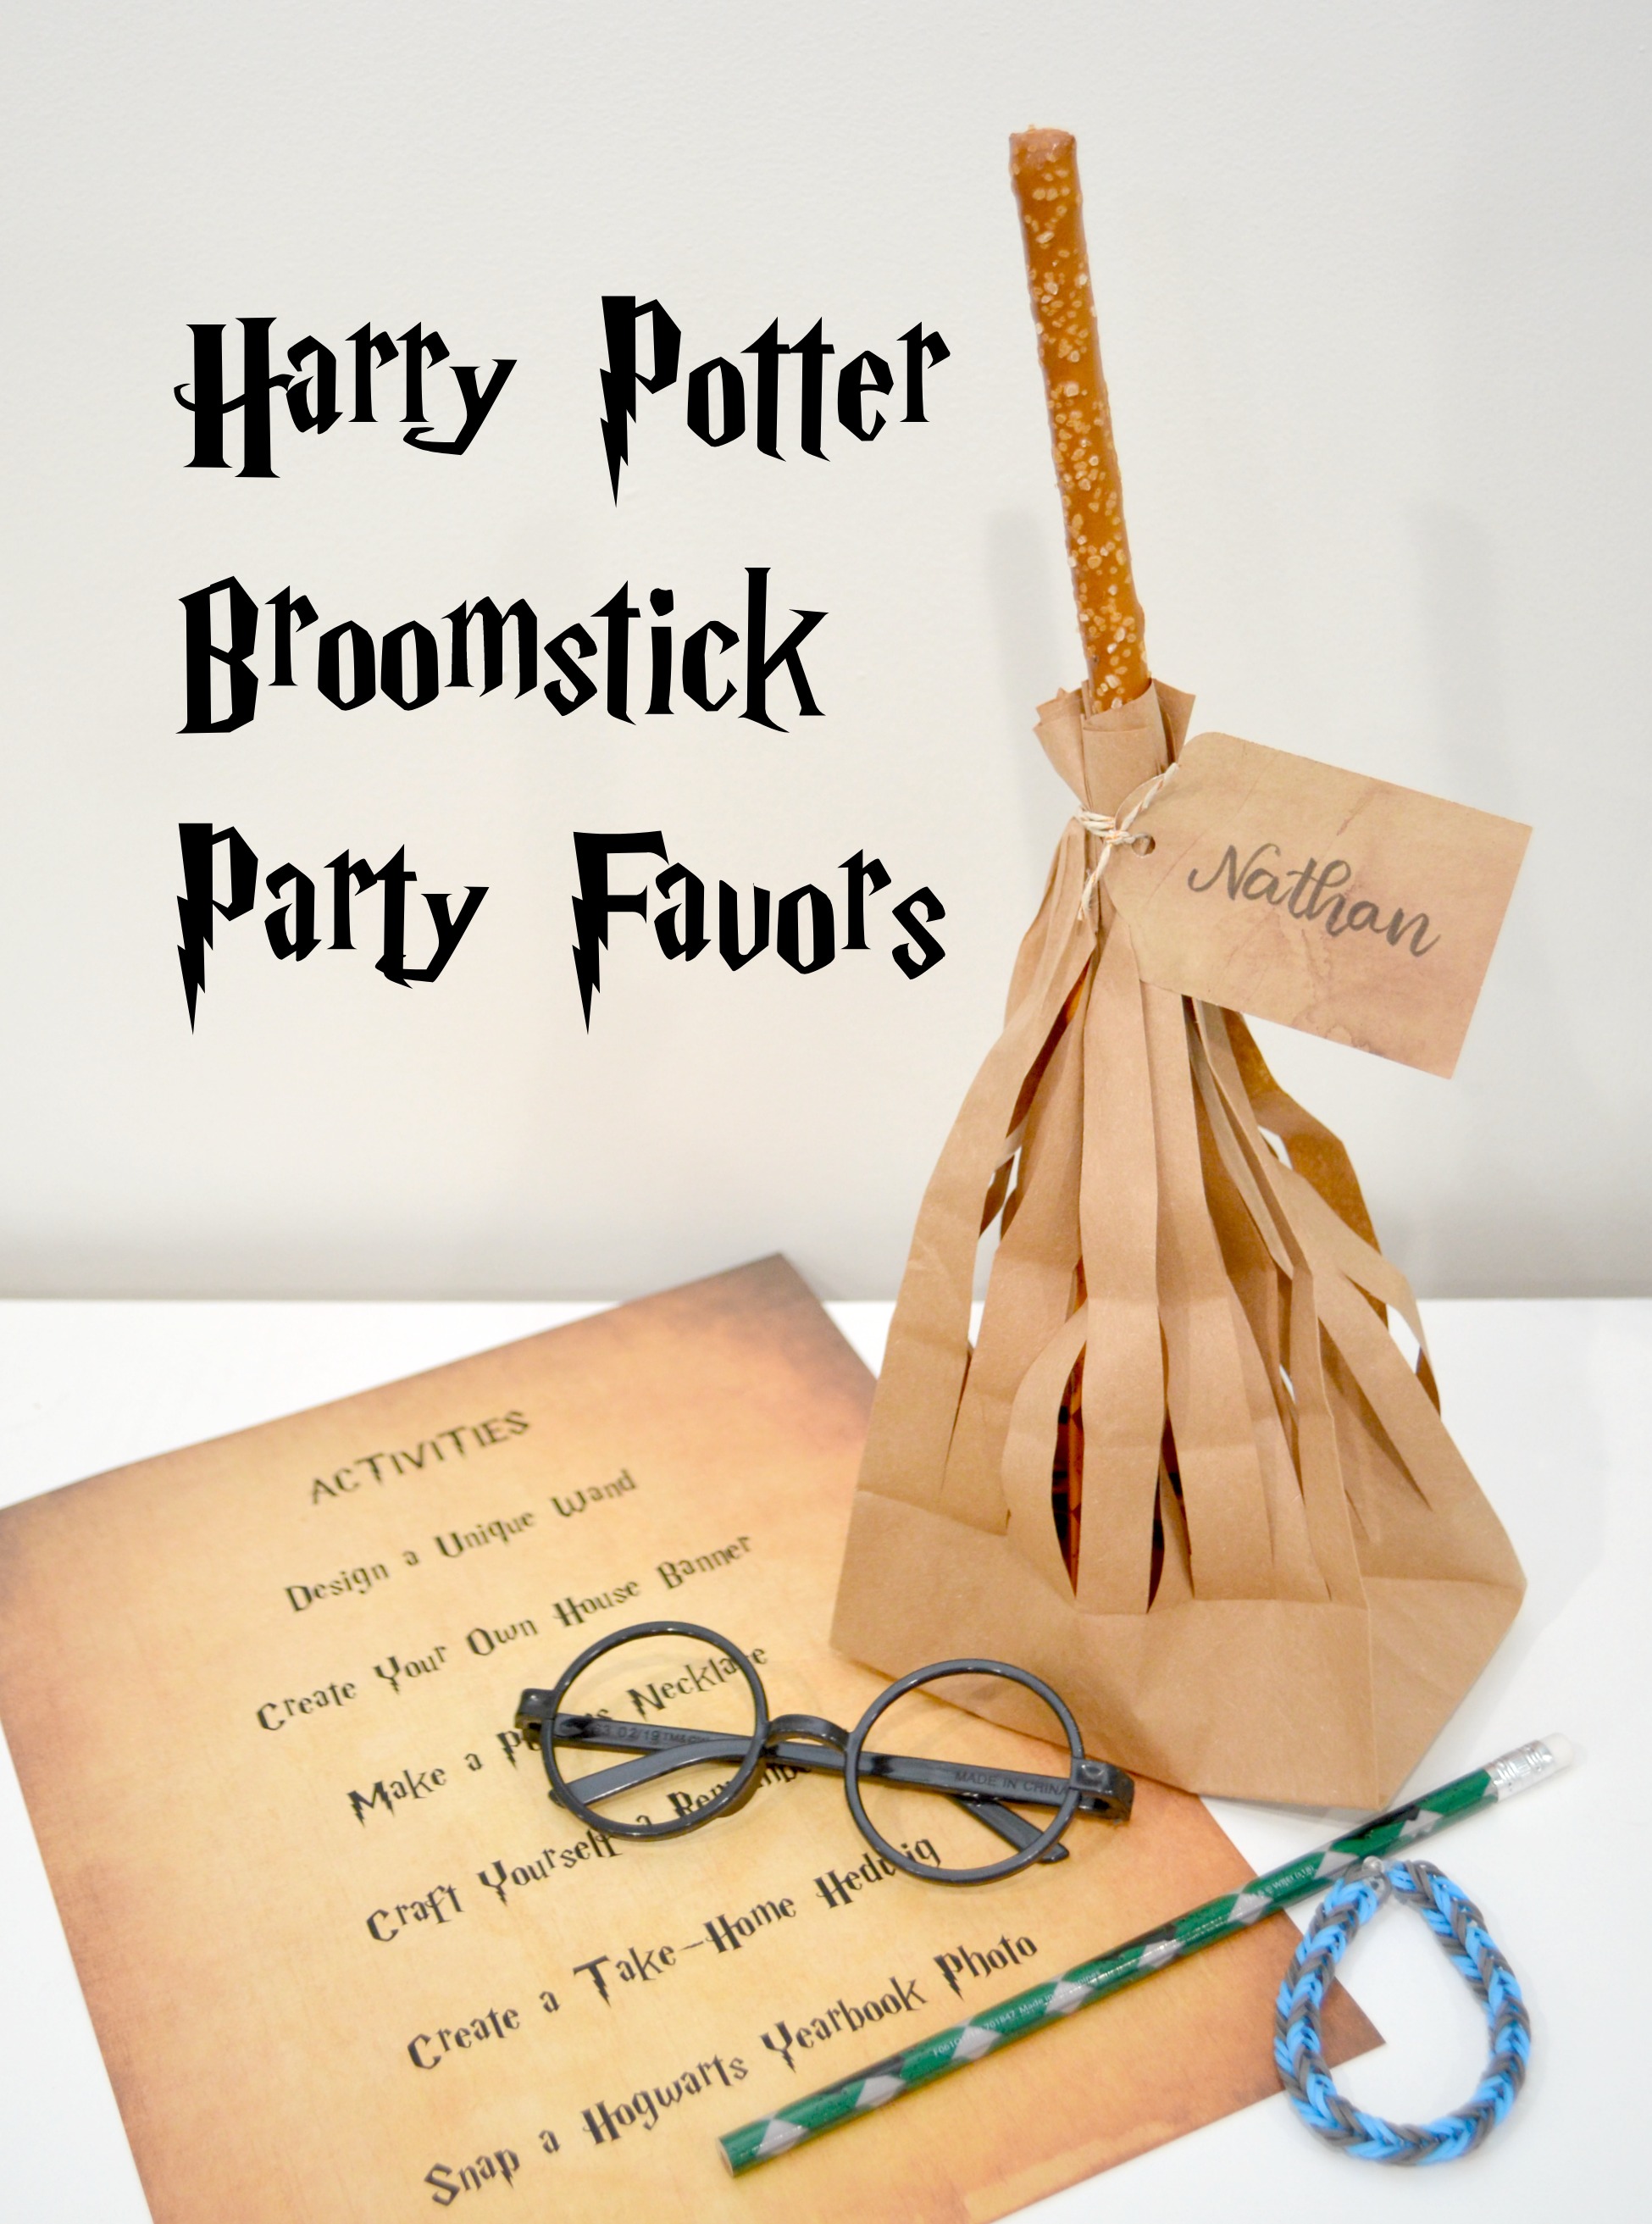 Harry Potter Broomstick Party Favors - Amy Latta Creations